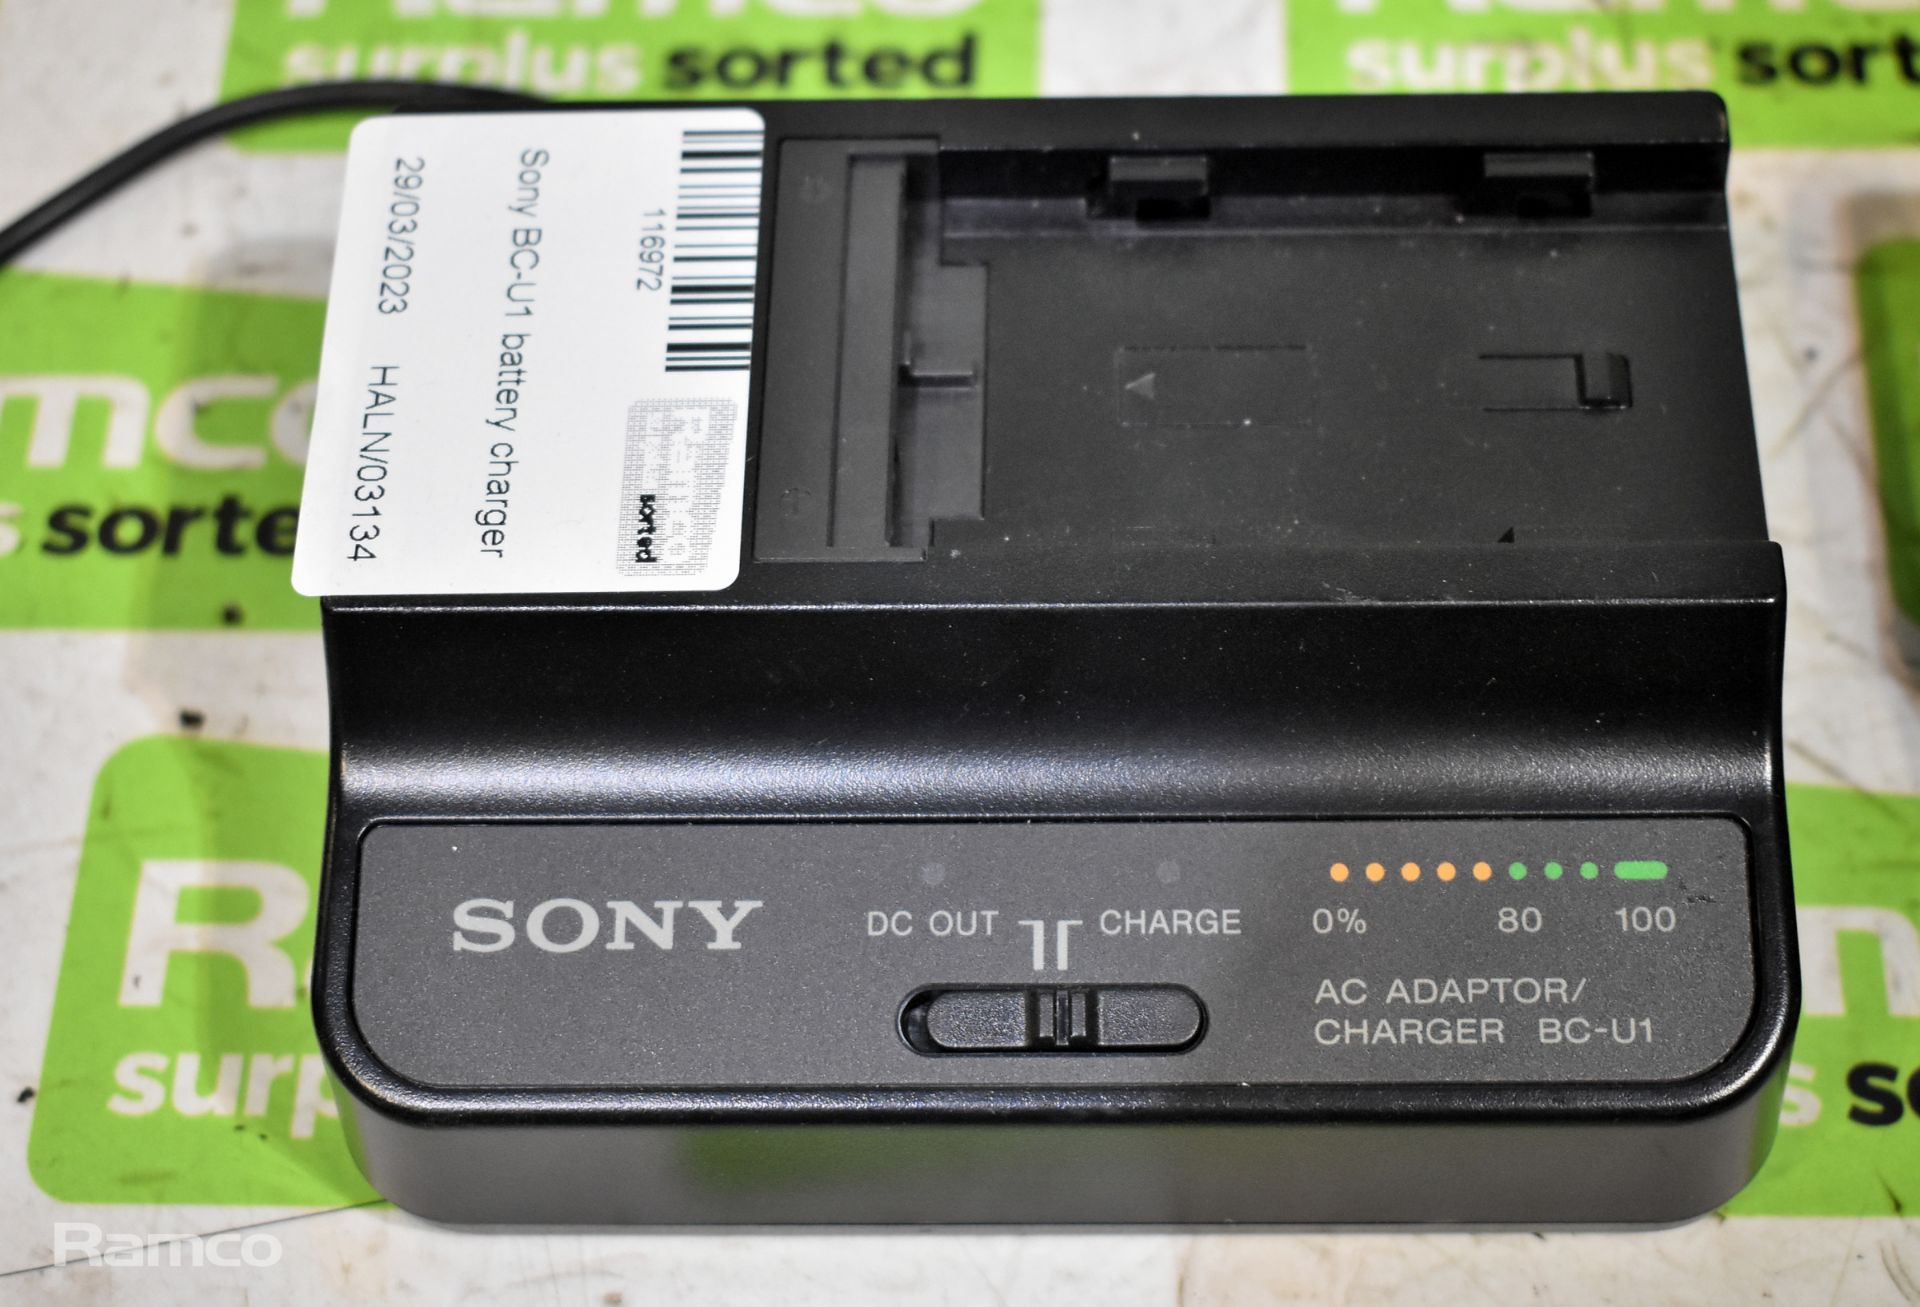 4x Sony BC-U1 battery chargers - Image 2 of 3